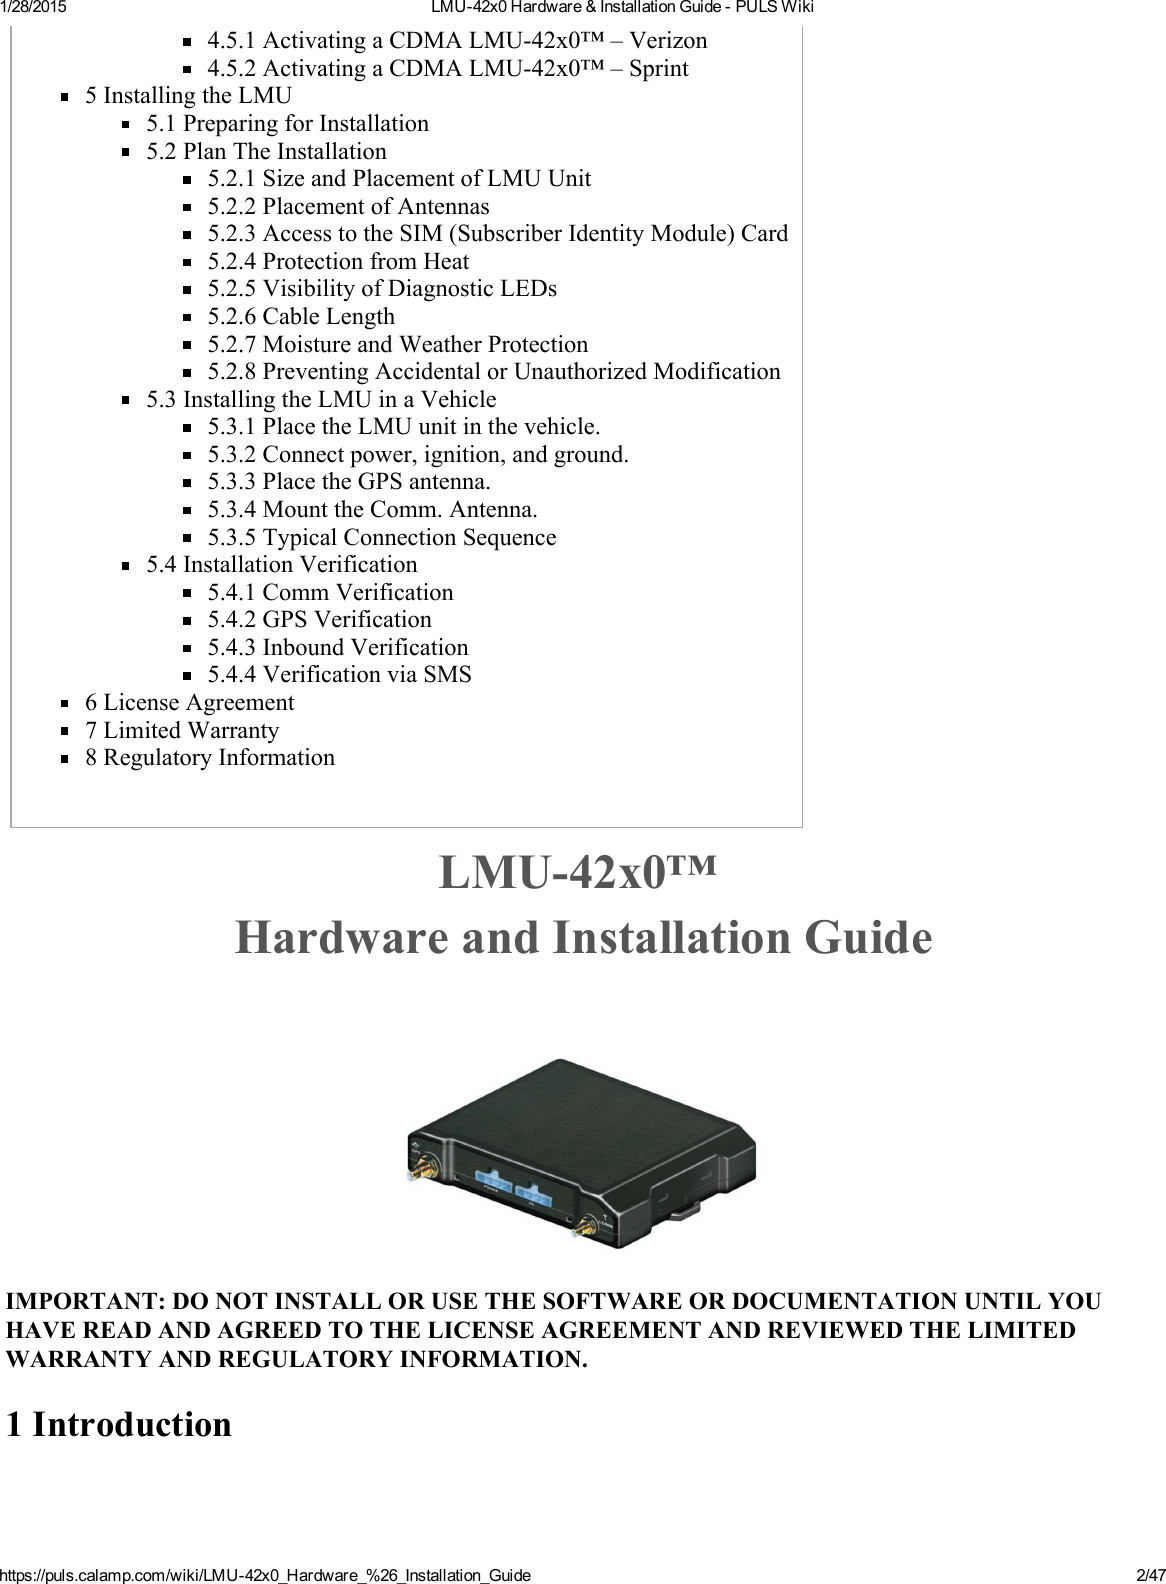 1/28/2015 LMU42x0Hardware&amp;InstallationGuidePULSWikihttps://puls.calamp.com/wiki/LMU42x0_Hardware_%26_Installation_Guide 2/474.5.1ActivatingaCDMALMU42x0™–Verizon4.5.2ActivatingaCDMALMU42x0™–Sprint5InstallingtheLMU5.1PreparingforInstallation5.2PlanTheInstallation5.2.1SizeandPlacementofLMUUnit5.2.2PlacementofAntennas5.2.3AccesstotheSIM(SubscriberIdentityModule)Card5.2.4ProtectionfromHeat5.2.5VisibilityofDiagnosticLEDs5.2.6CableLength5.2.7MoistureandWeatherProtection5.2.8PreventingAccidentalorUnauthorizedModification5.3InstallingtheLMUinaVehicle5.3.1PlacetheLMUunitinthevehicle.5.3.2Connectpower,ignition,andground.5.3.3PlacetheGPSantenna.5.3.4MounttheComm.Antenna.5.3.5TypicalConnectionSequence5.4InstallationVerification5.4.1CommVerification5.4.2GPSVerification5.4.3InboundVerification5.4.4VerificationviaSMS6LicenseAgreement7LimitedWarranty8RegulatoryInformationLMU42x0™HardwareandInstallationGuideIMPORTANT:DONOTINSTALLORUSETHESOFTWAREORDOCUMENTATIONUNTILYOUHAVEREADANDAGREEDTOTHELICENSEAGREEMENTANDREVIEWEDTHELIMITEDWARRANTYANDREGULATORYINFORMATION.1Introduction